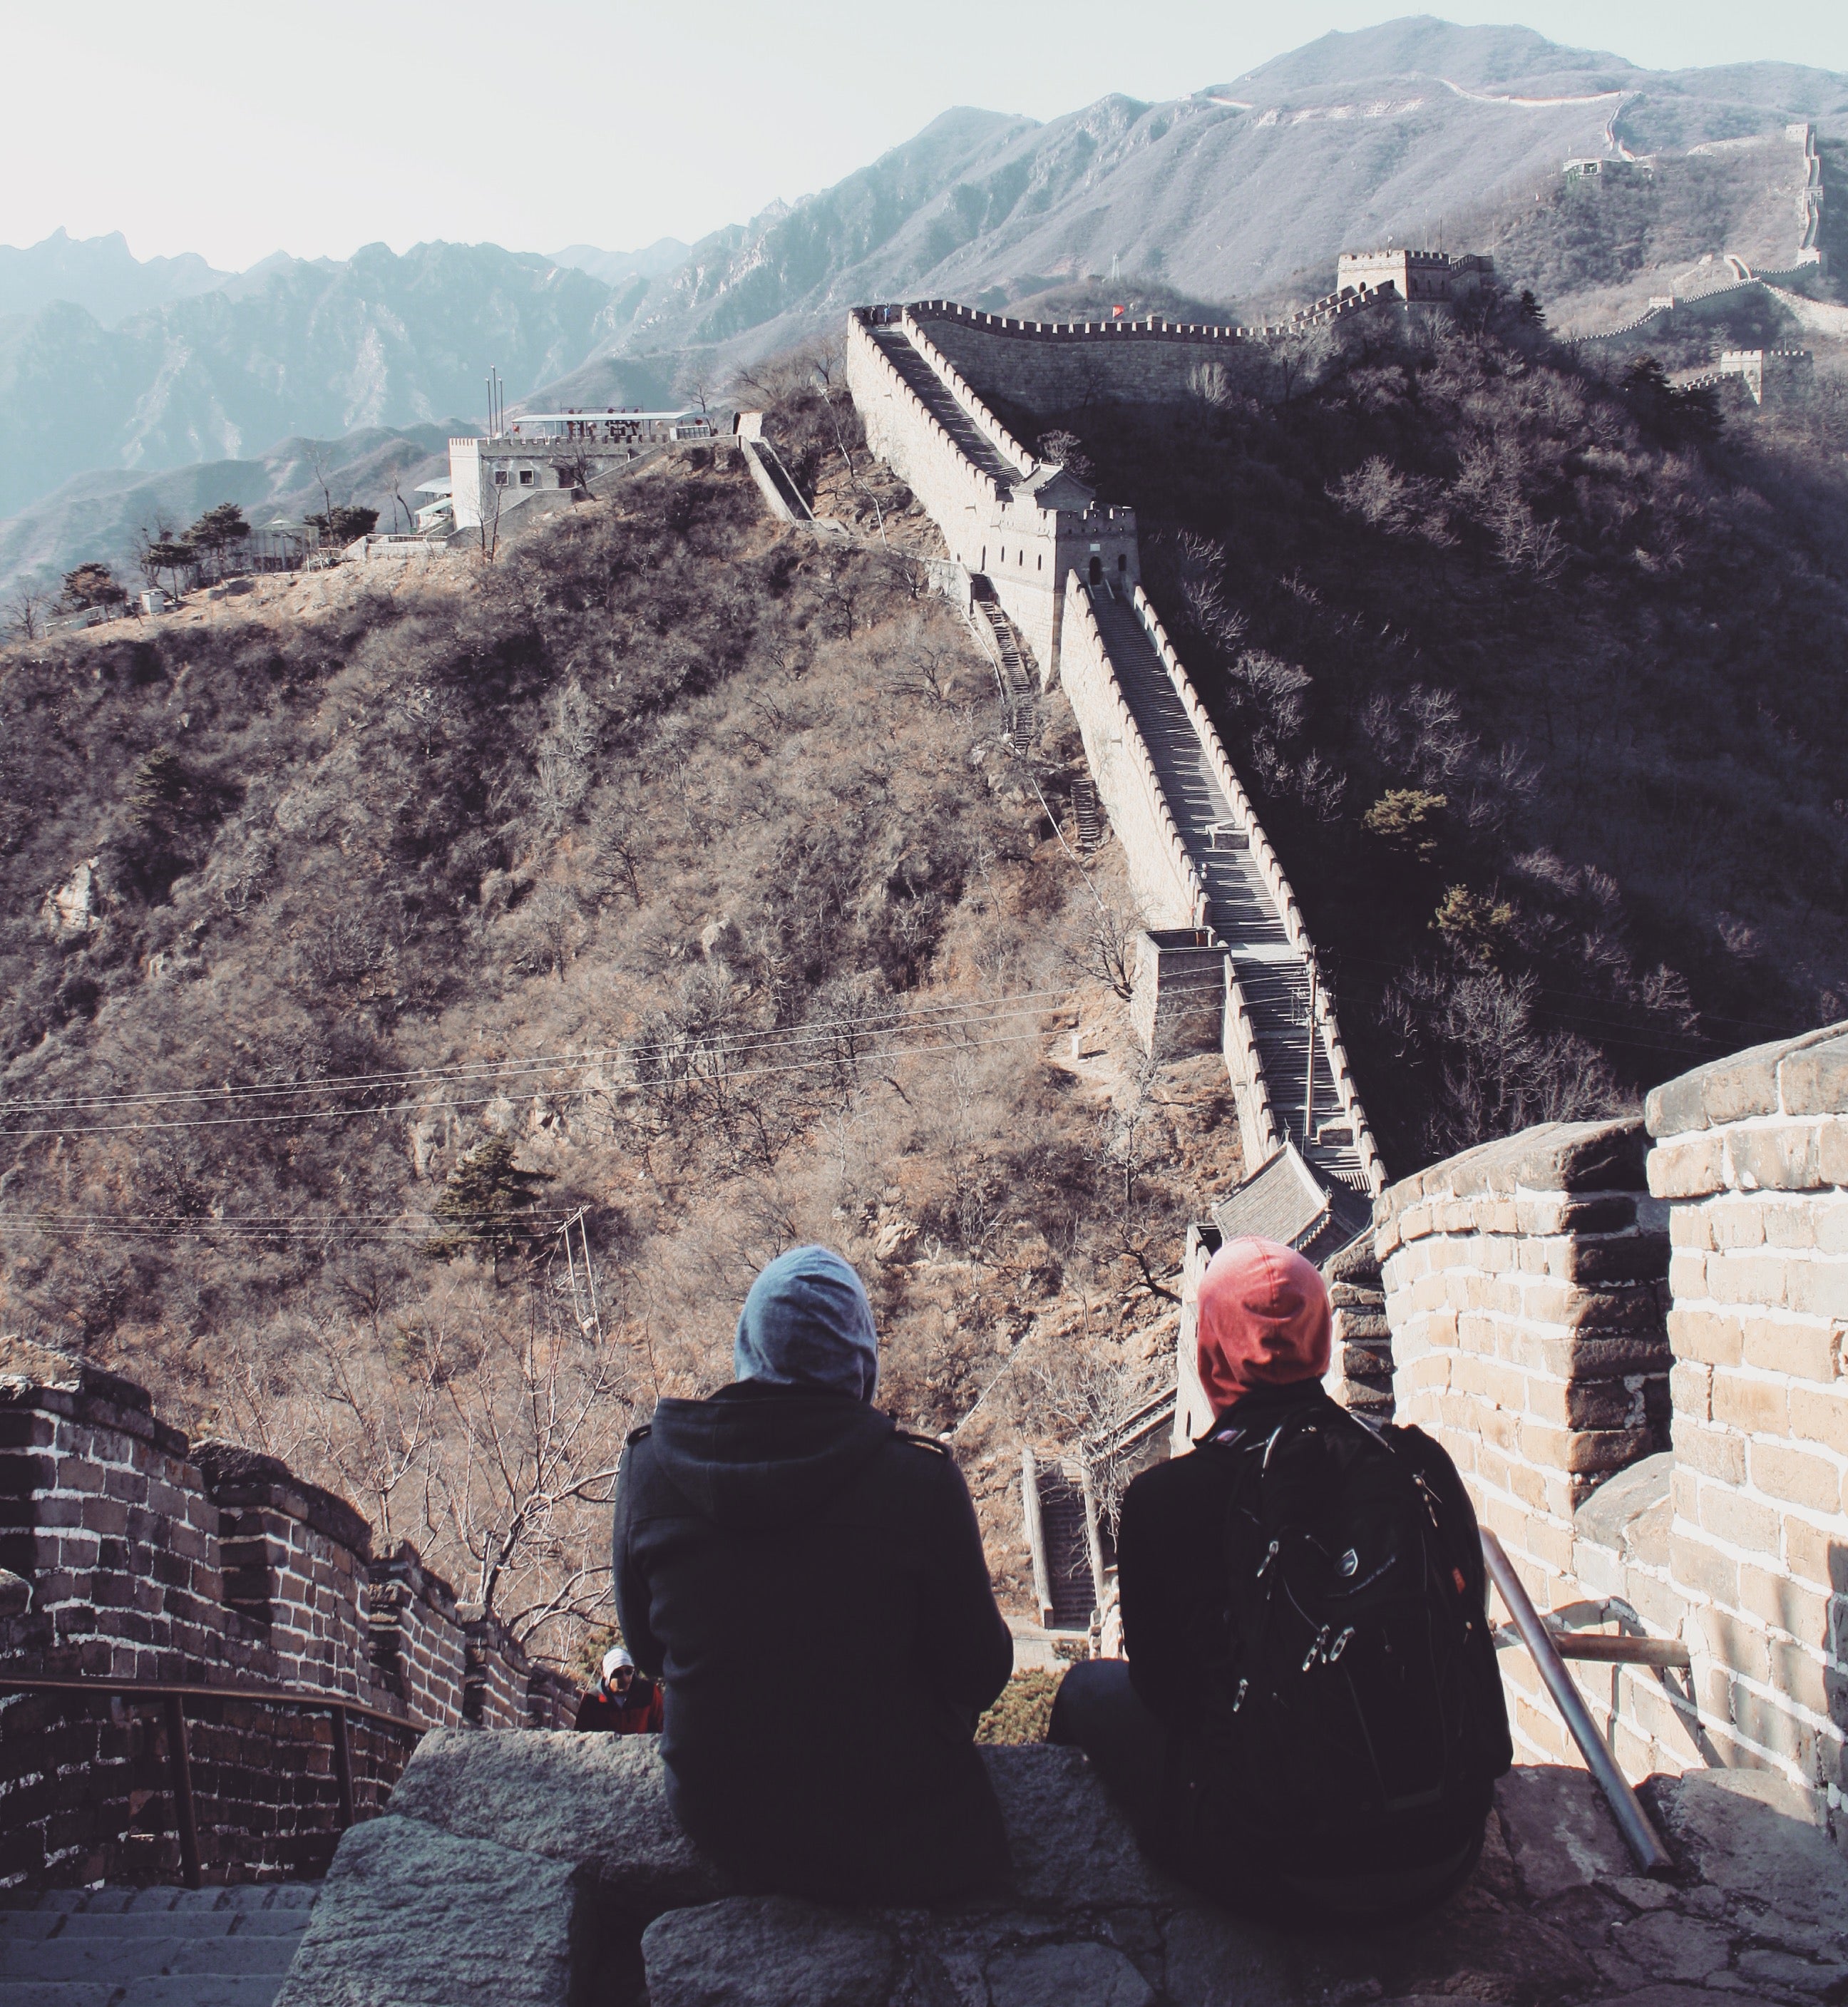 Sitting on Great Wall of China